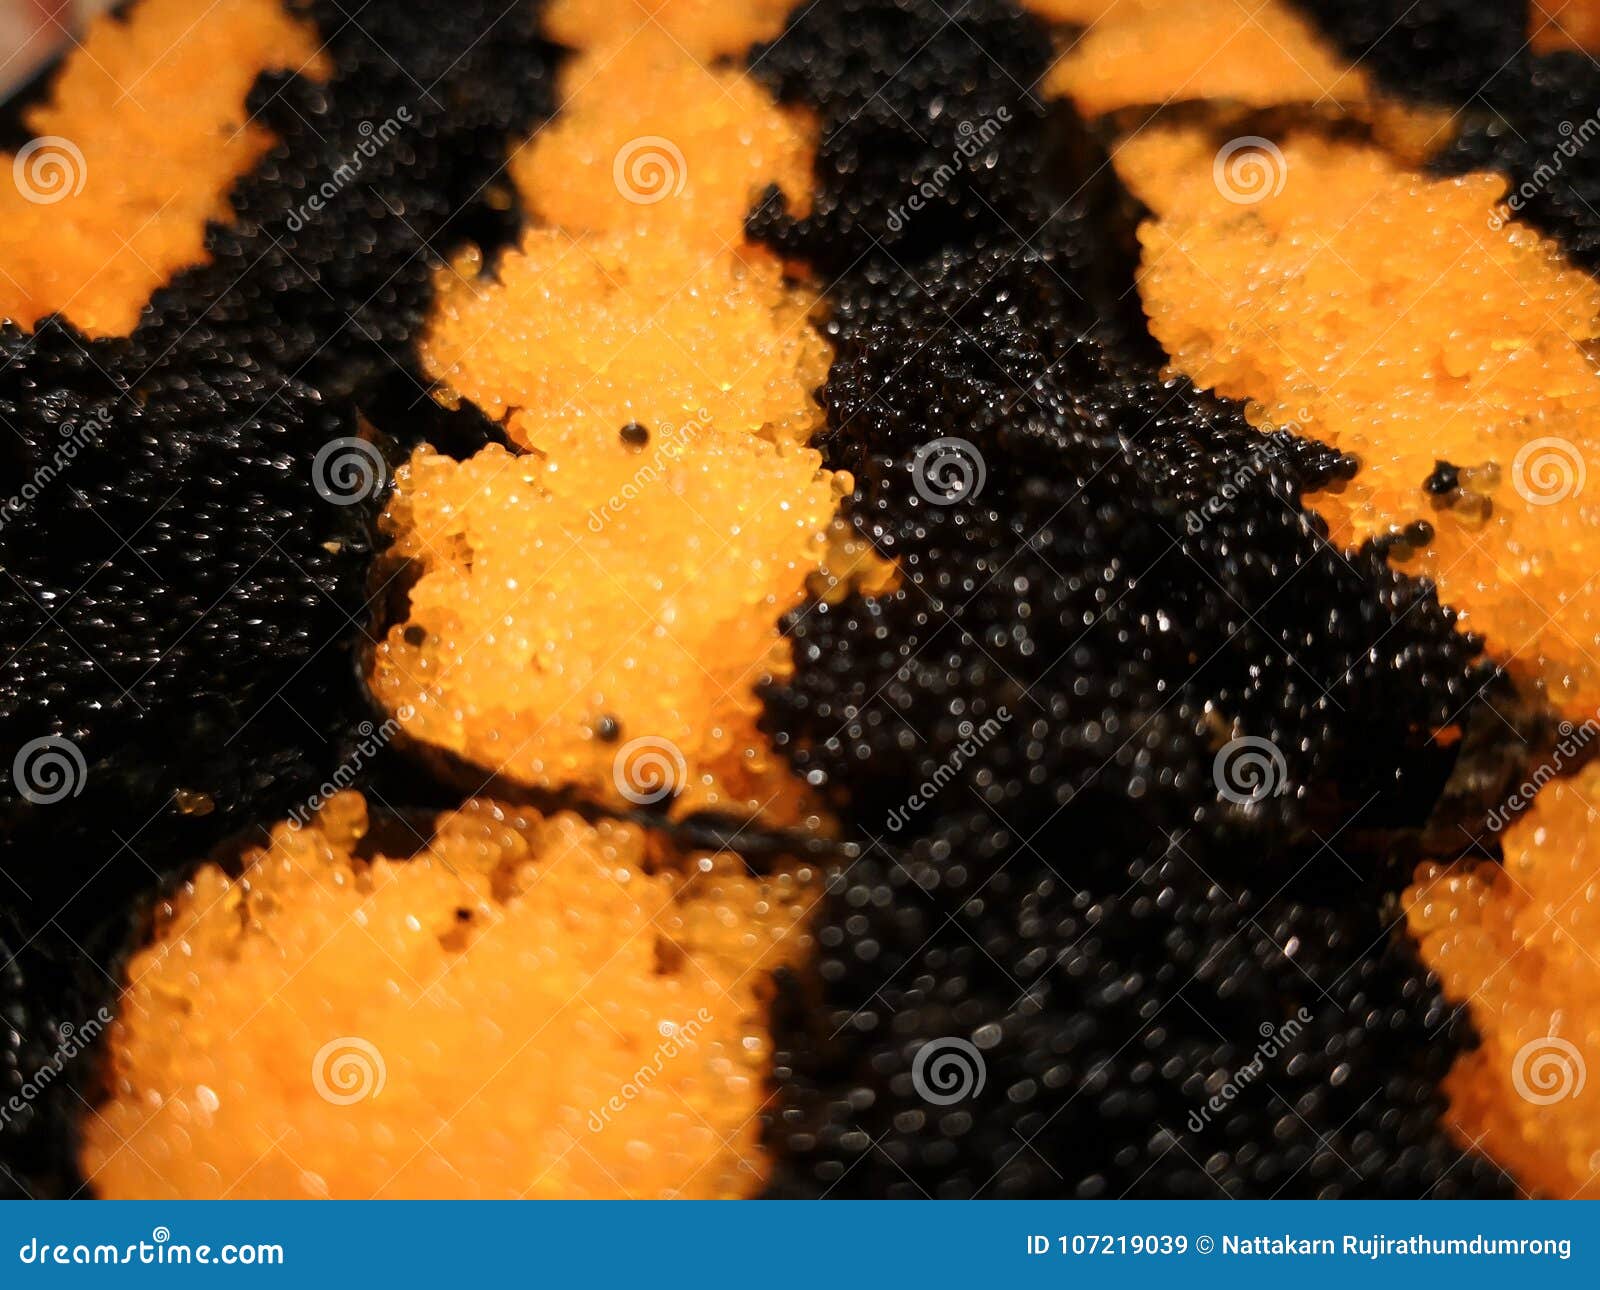 Tobiko is Name of the Japanese Flying Fish Egg. the Orange Eggs